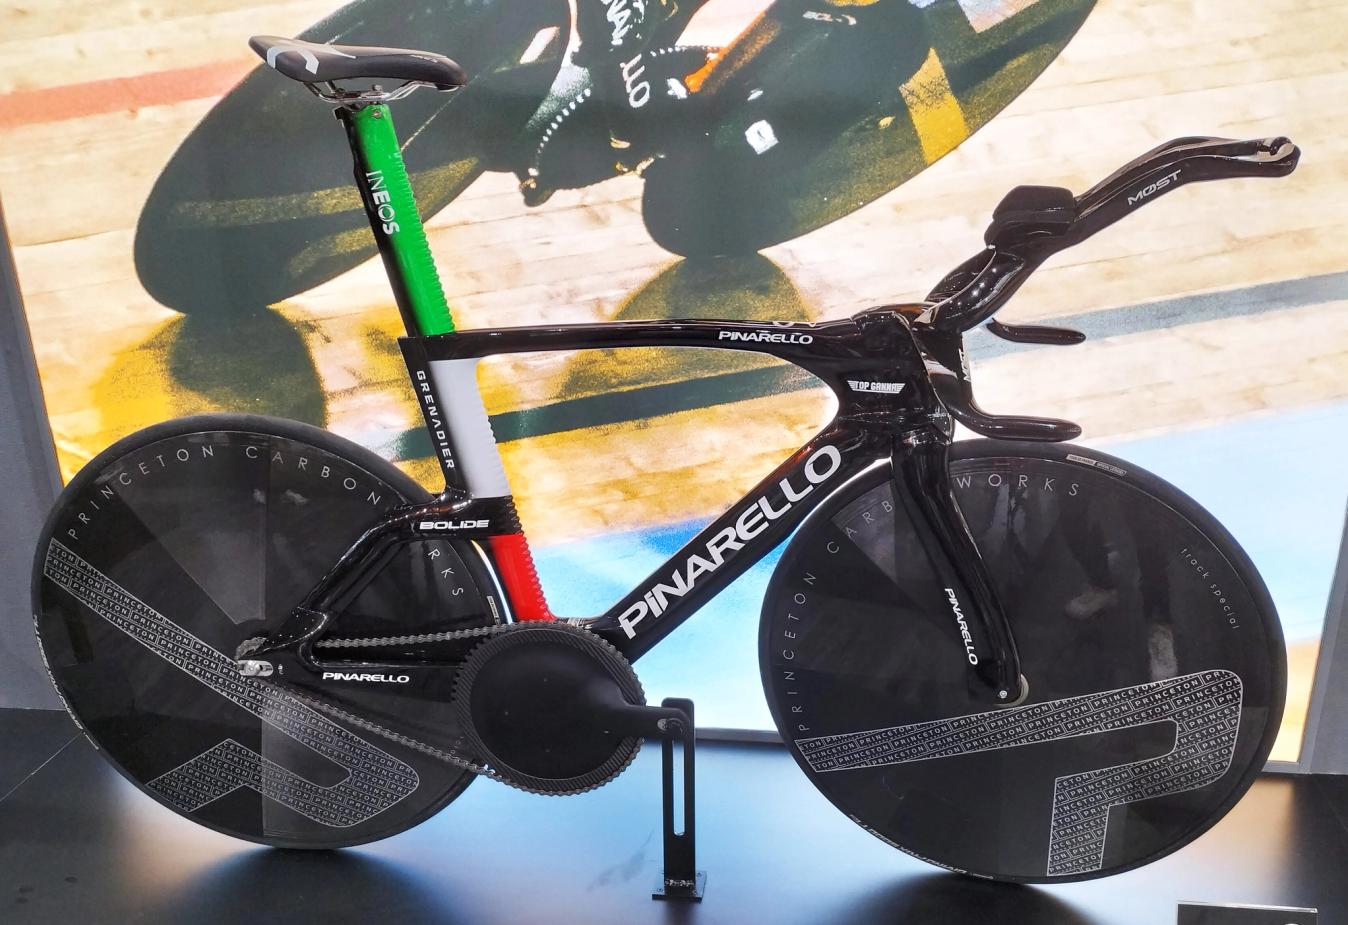 Is this Pinarello Bolide the fastest bike in the world? It's the bike that propelled Filippo Ganna to the hour record in 2023, which many regard as the ultimate cycling test of speed